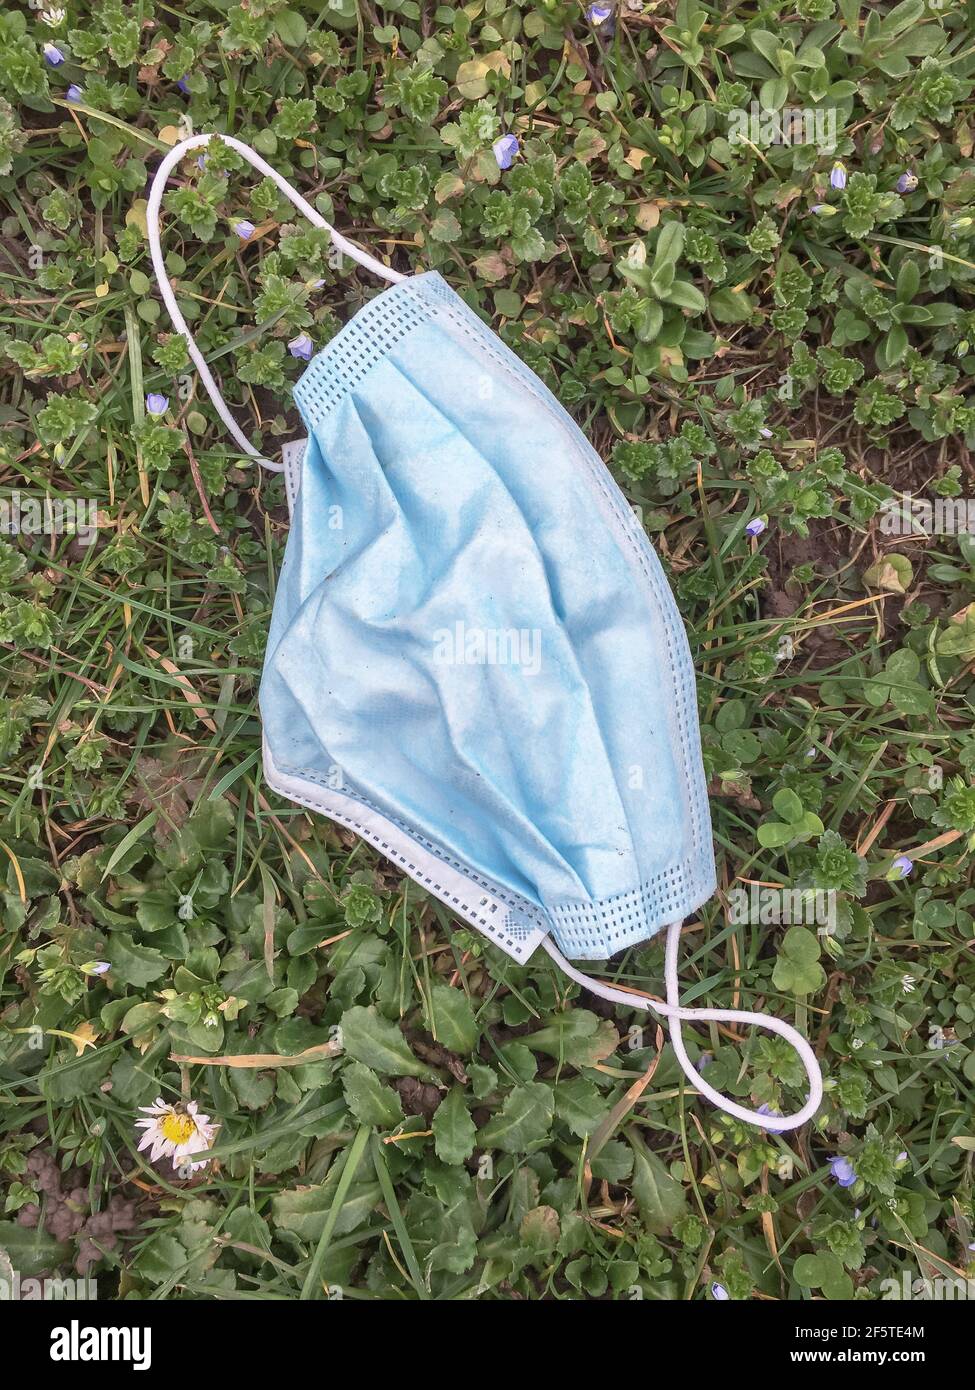 Surgical face mask abandoned on the ground into grass. Coronavirus covid-19 pandemic. Stock Photo